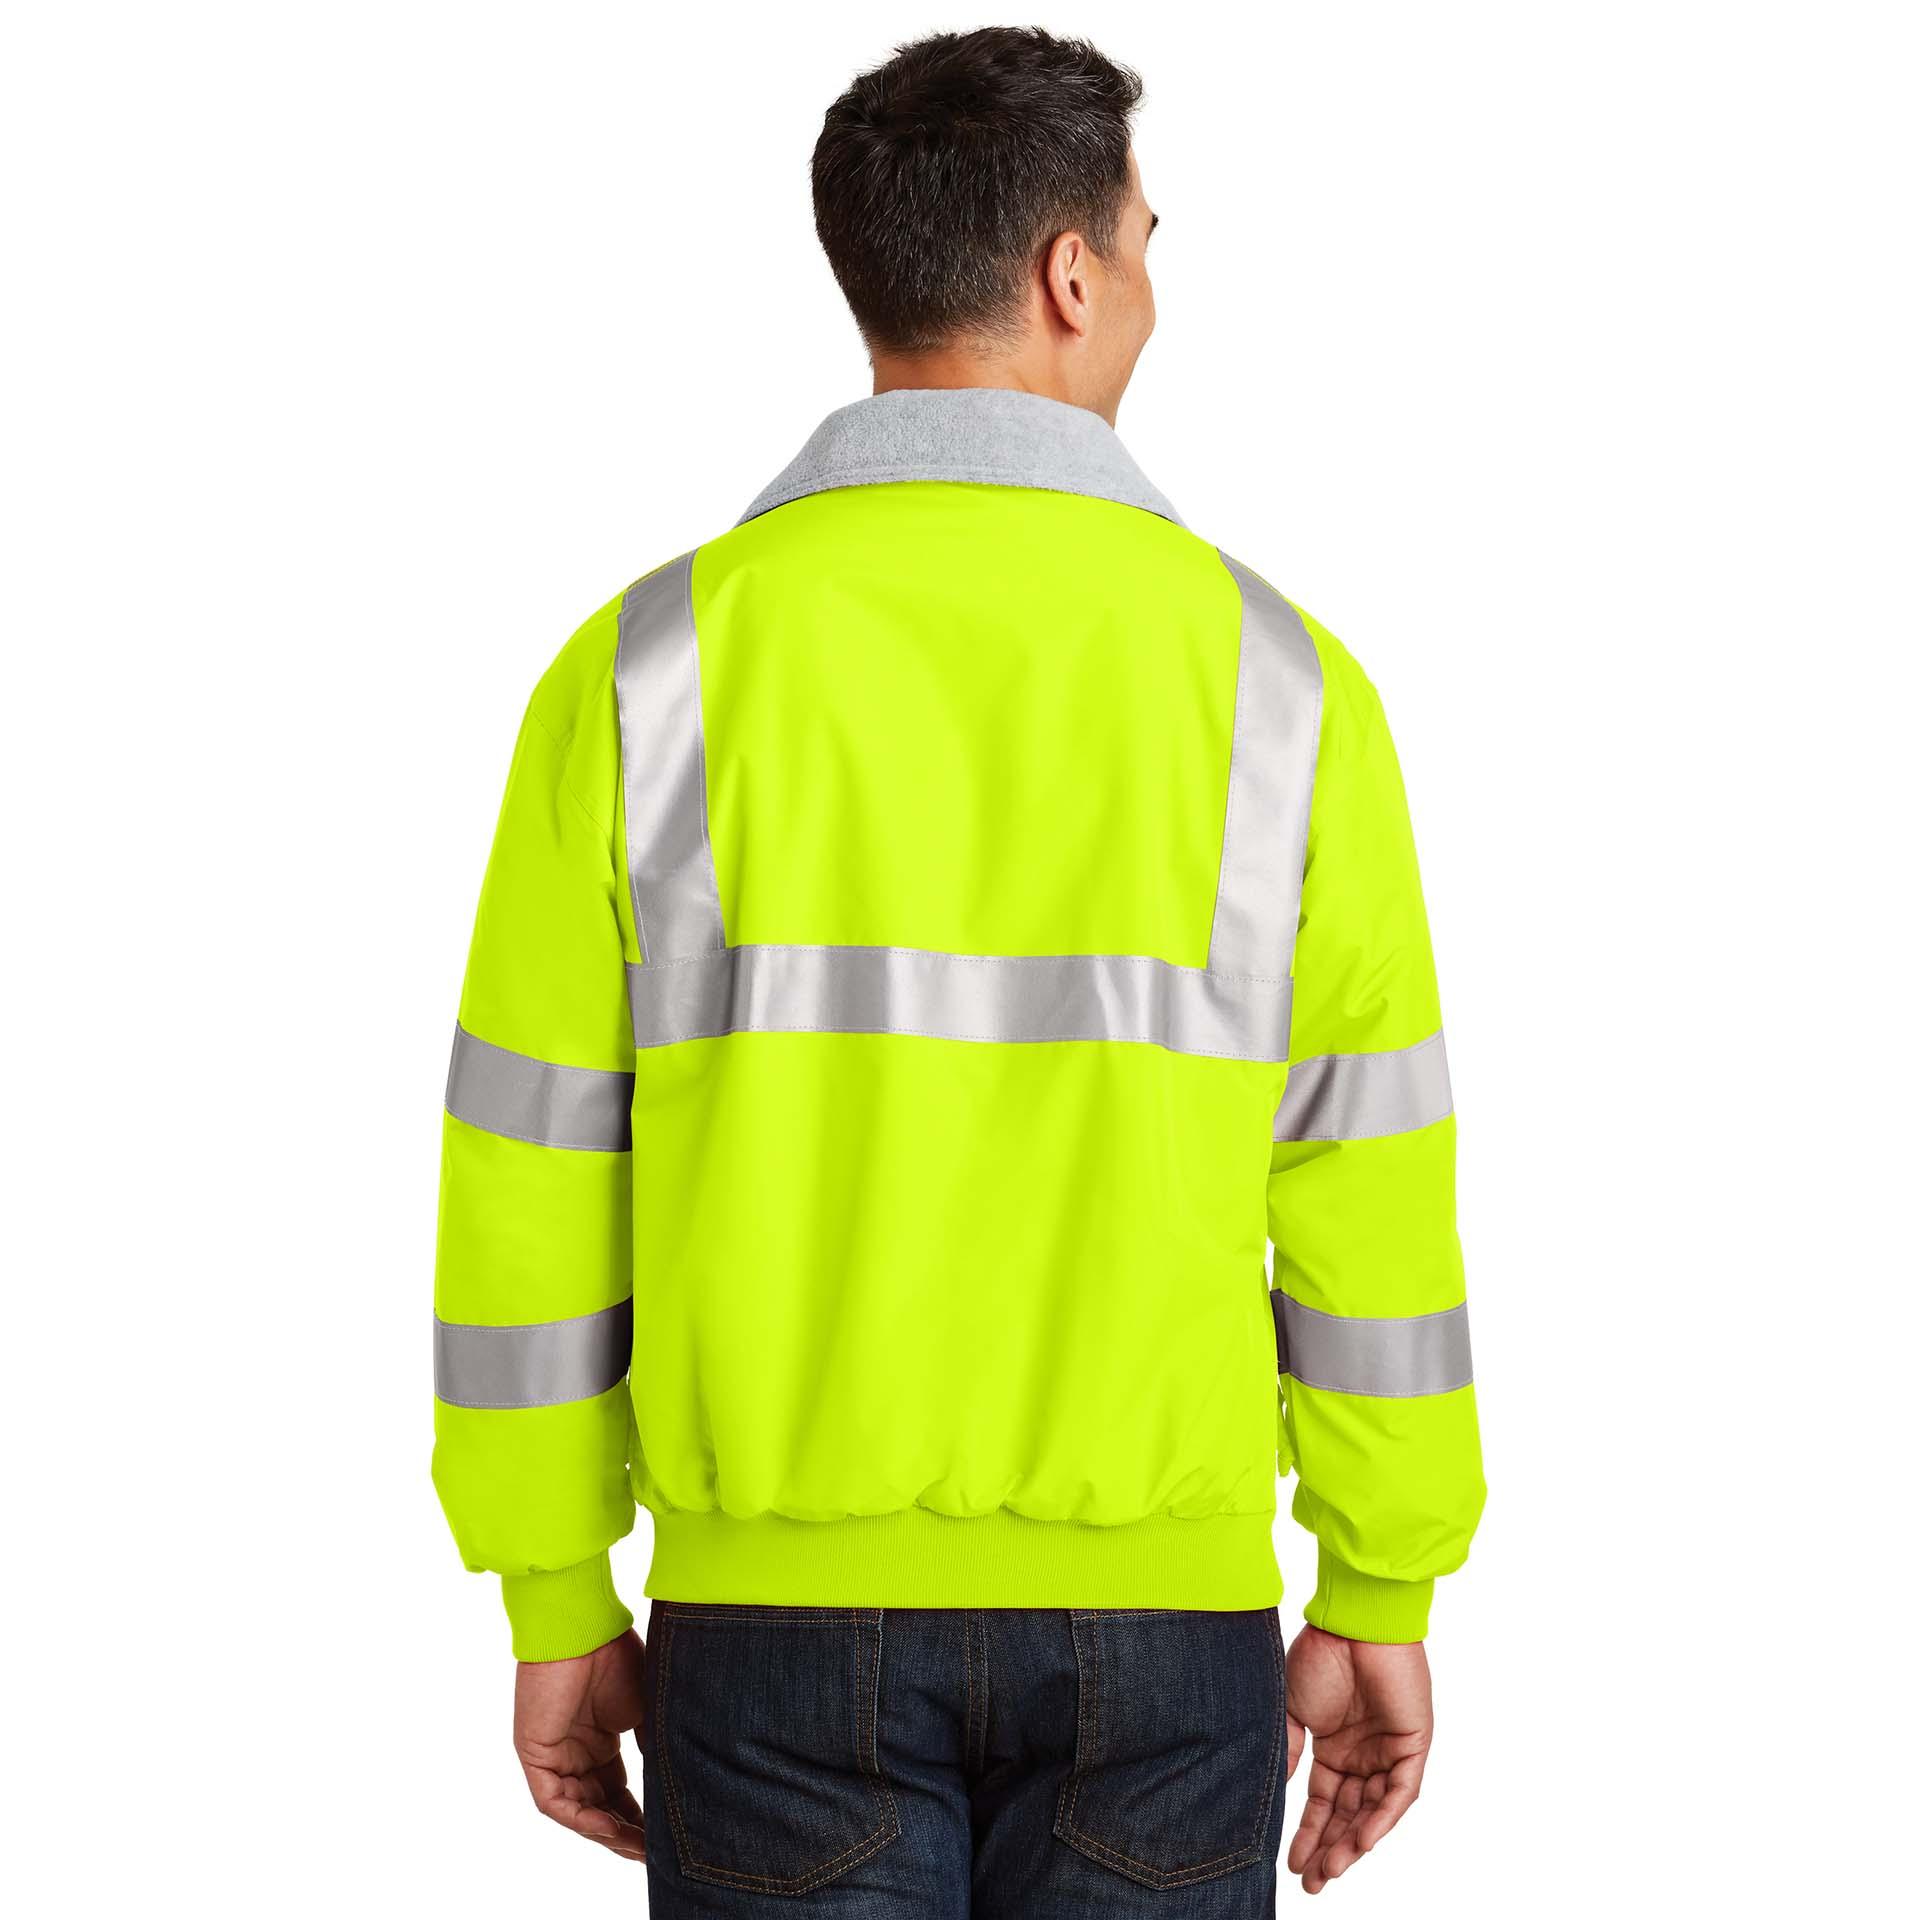 XL Safety Orange and Reflective Port Authority Safety Challenger Jacket with Reflective Taping 